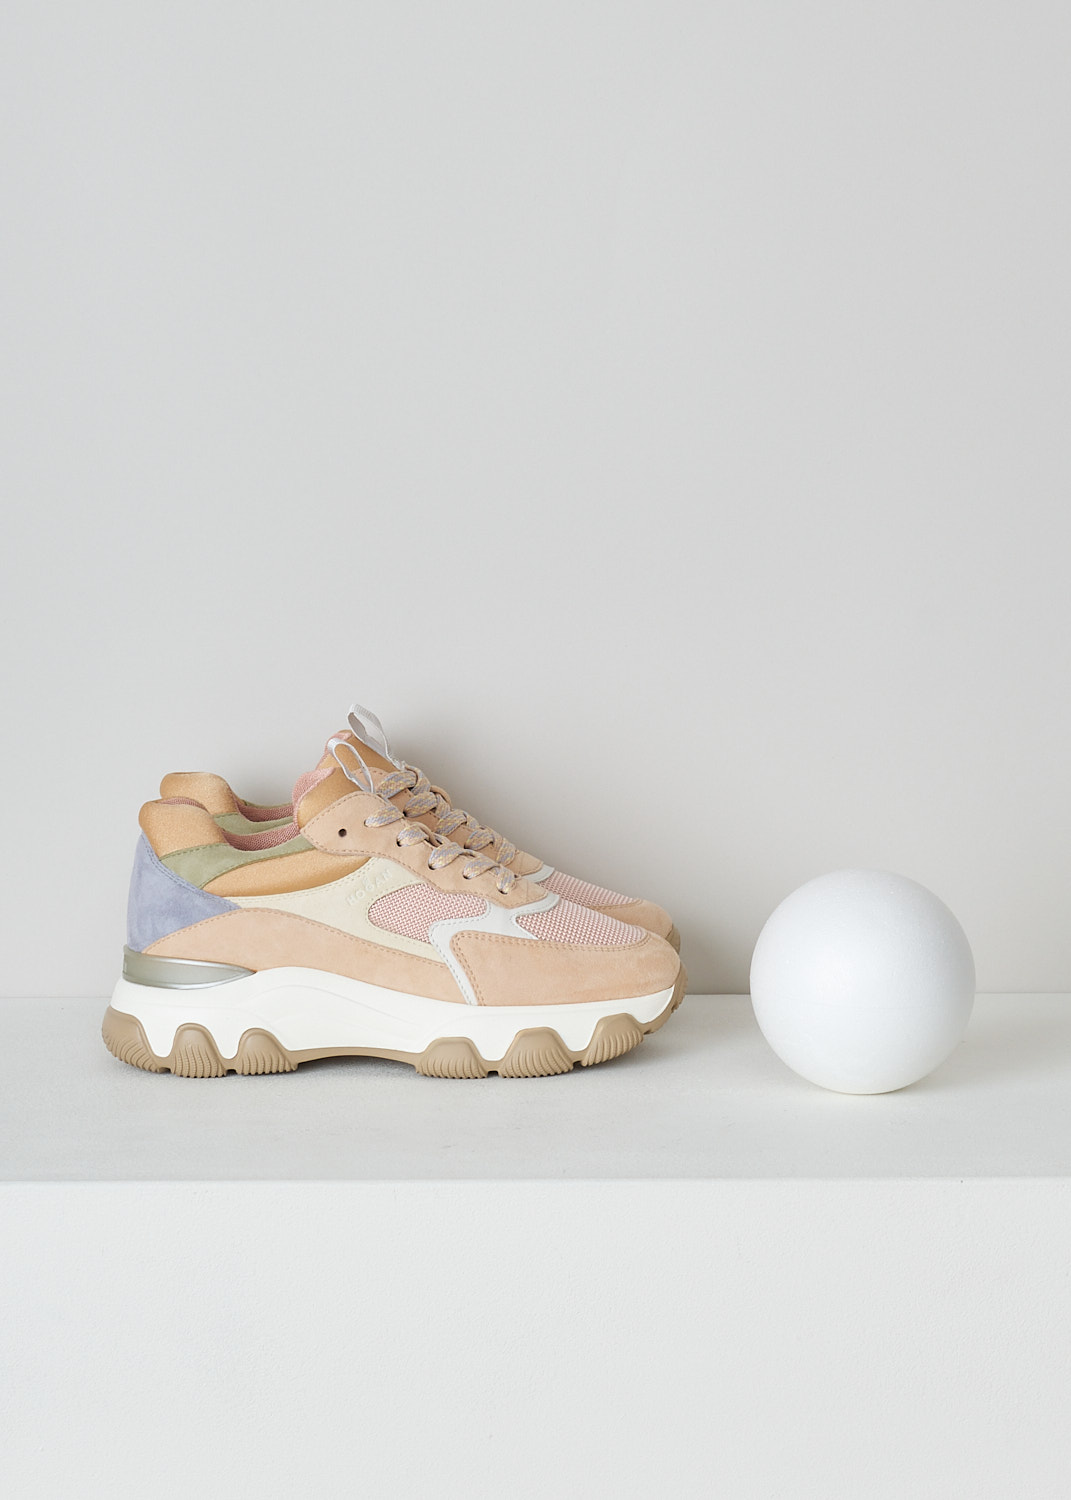 HOGAN, HYPERACTIVE ALLACCIATO MULTICOLORED SNEAKERS, HXW5400DG60QZ80MR4_QZ8,  Pink, Beige, Orange, Side,  These chunky sneakers feature front lace-up fastening with multicolored laces. The sneakers have a paneled look, alternating leather and fabric patches in pastel tones. These sneakers have a chunky sole. The sneakers have a removable memory foam insole and comes with an additional pair of dusty pink laces.   
